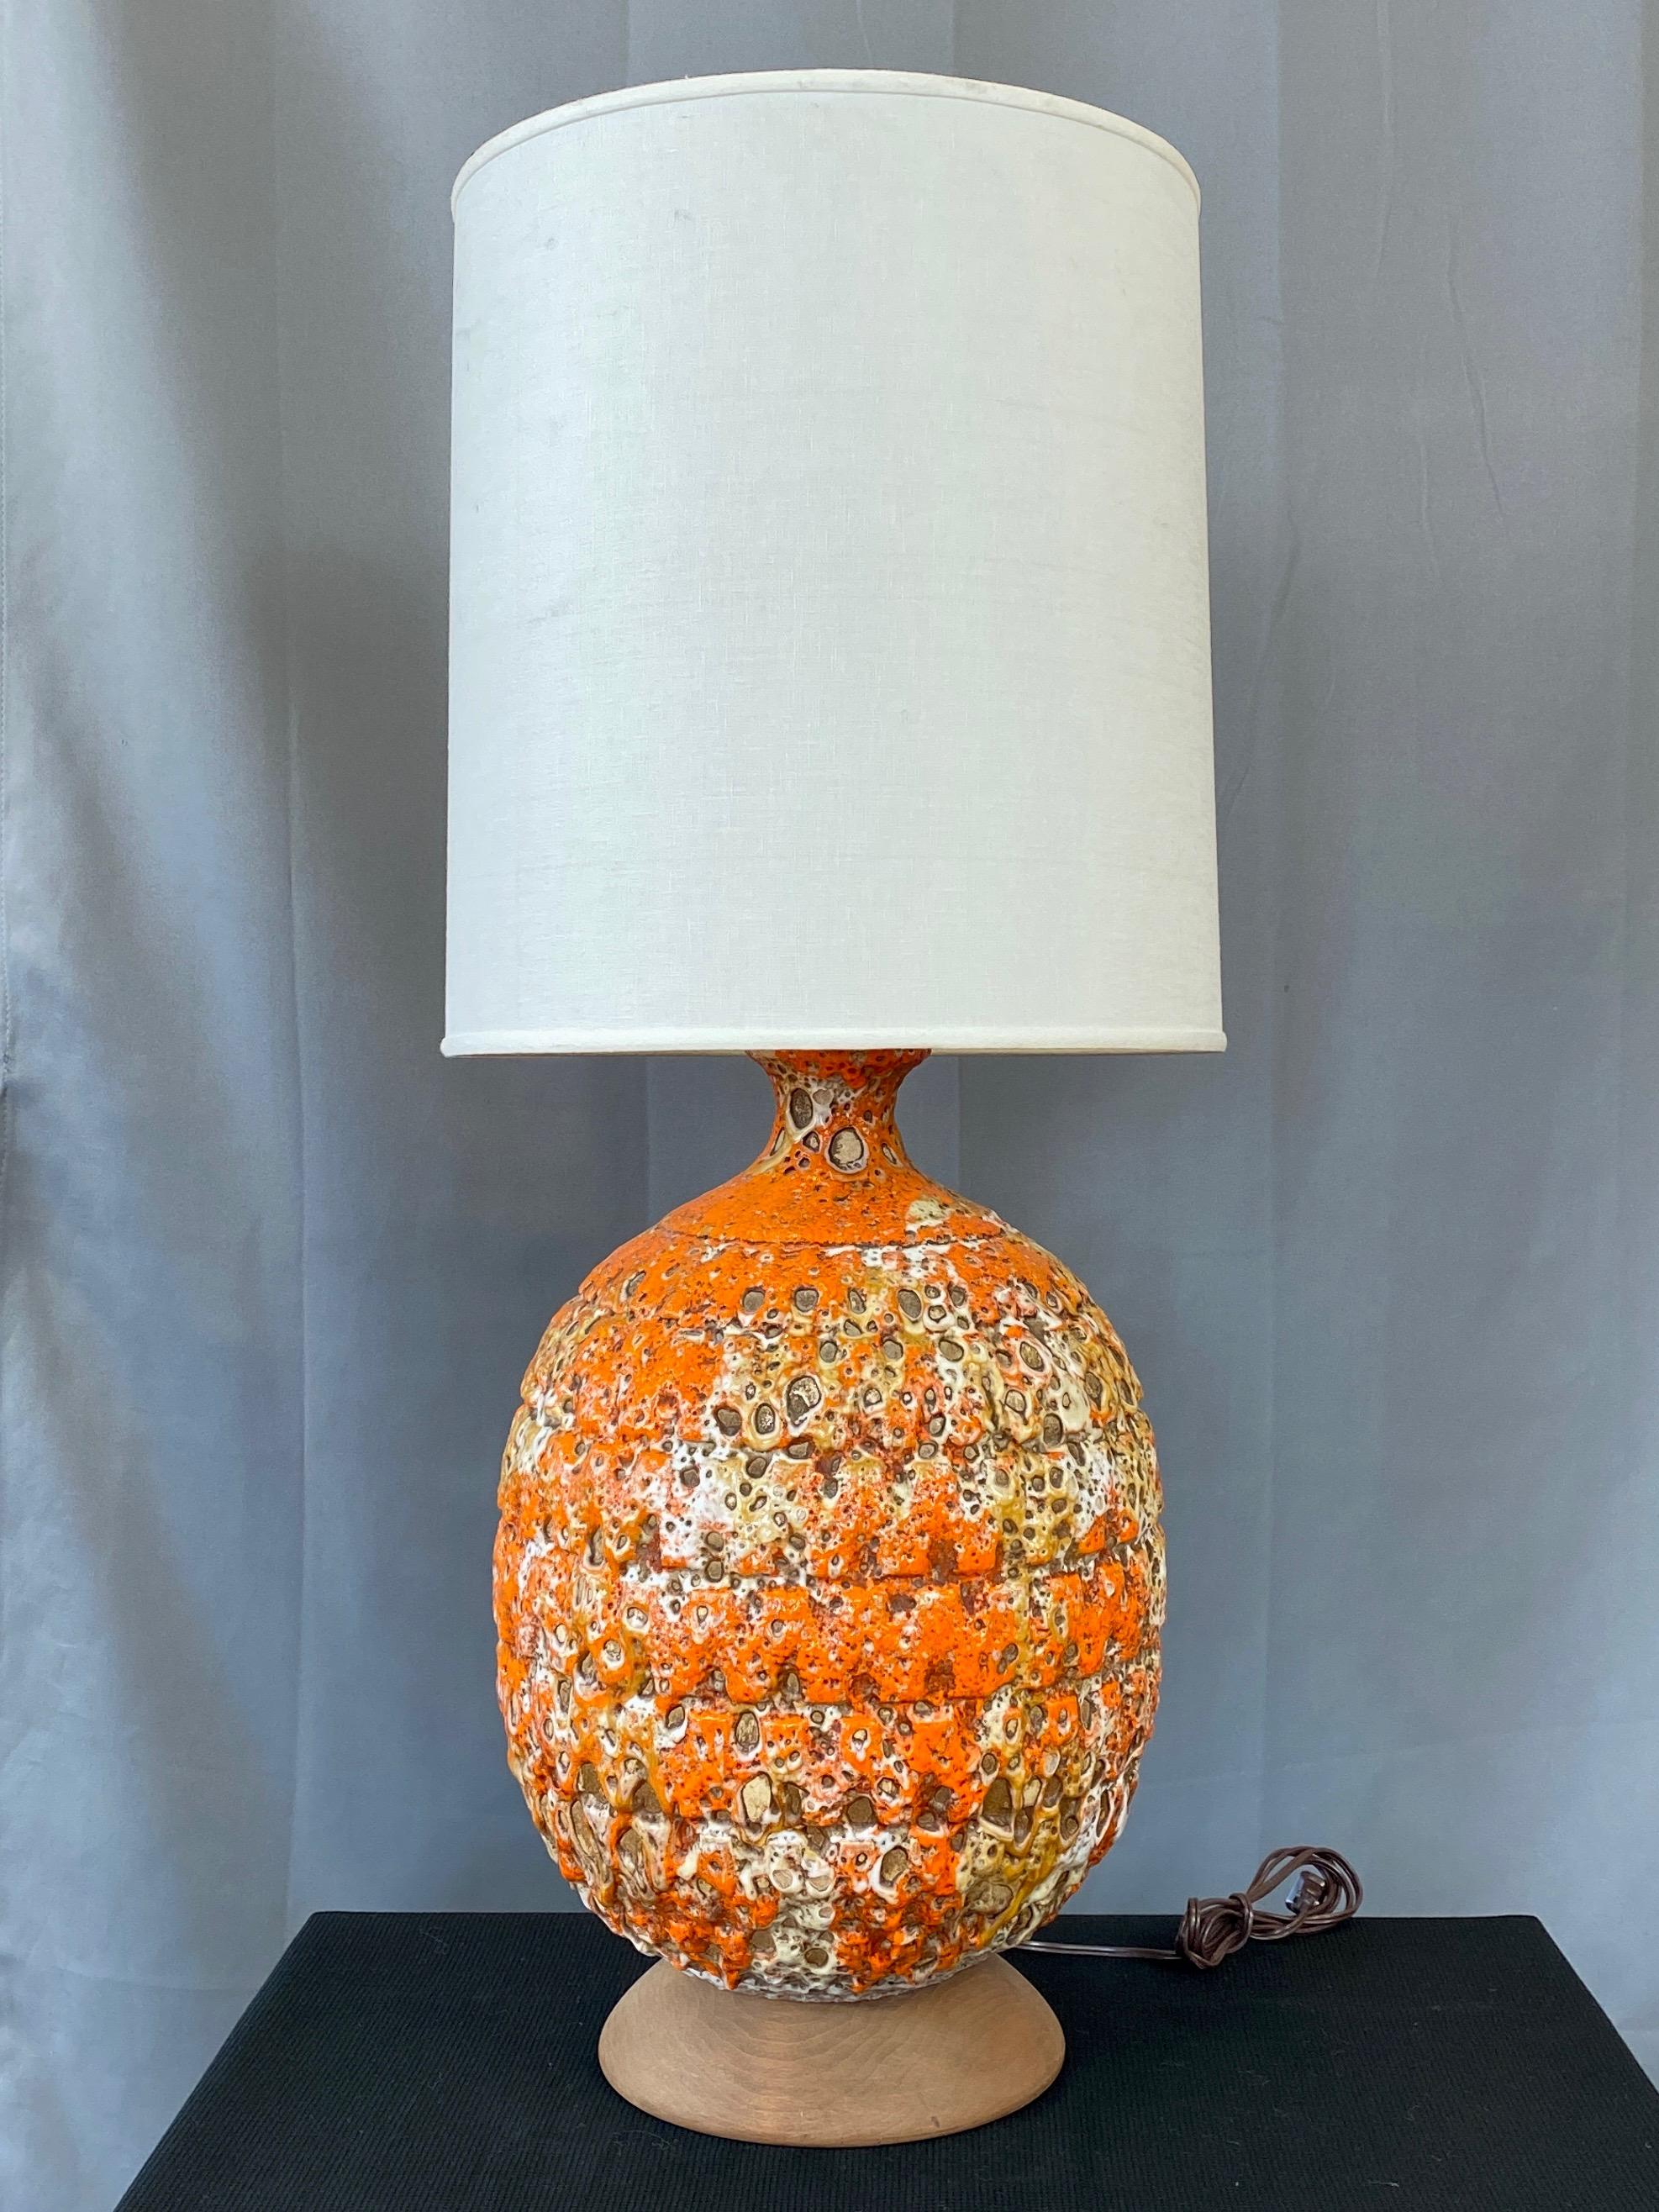 A large and impressive mid-century modern orange fat lava glazed ceramic table lamp with shade.

Very thickly applied and molten-like blaze orange glaze with tan and white accents truly lives up to the fat lava moniker. Indicative of the more